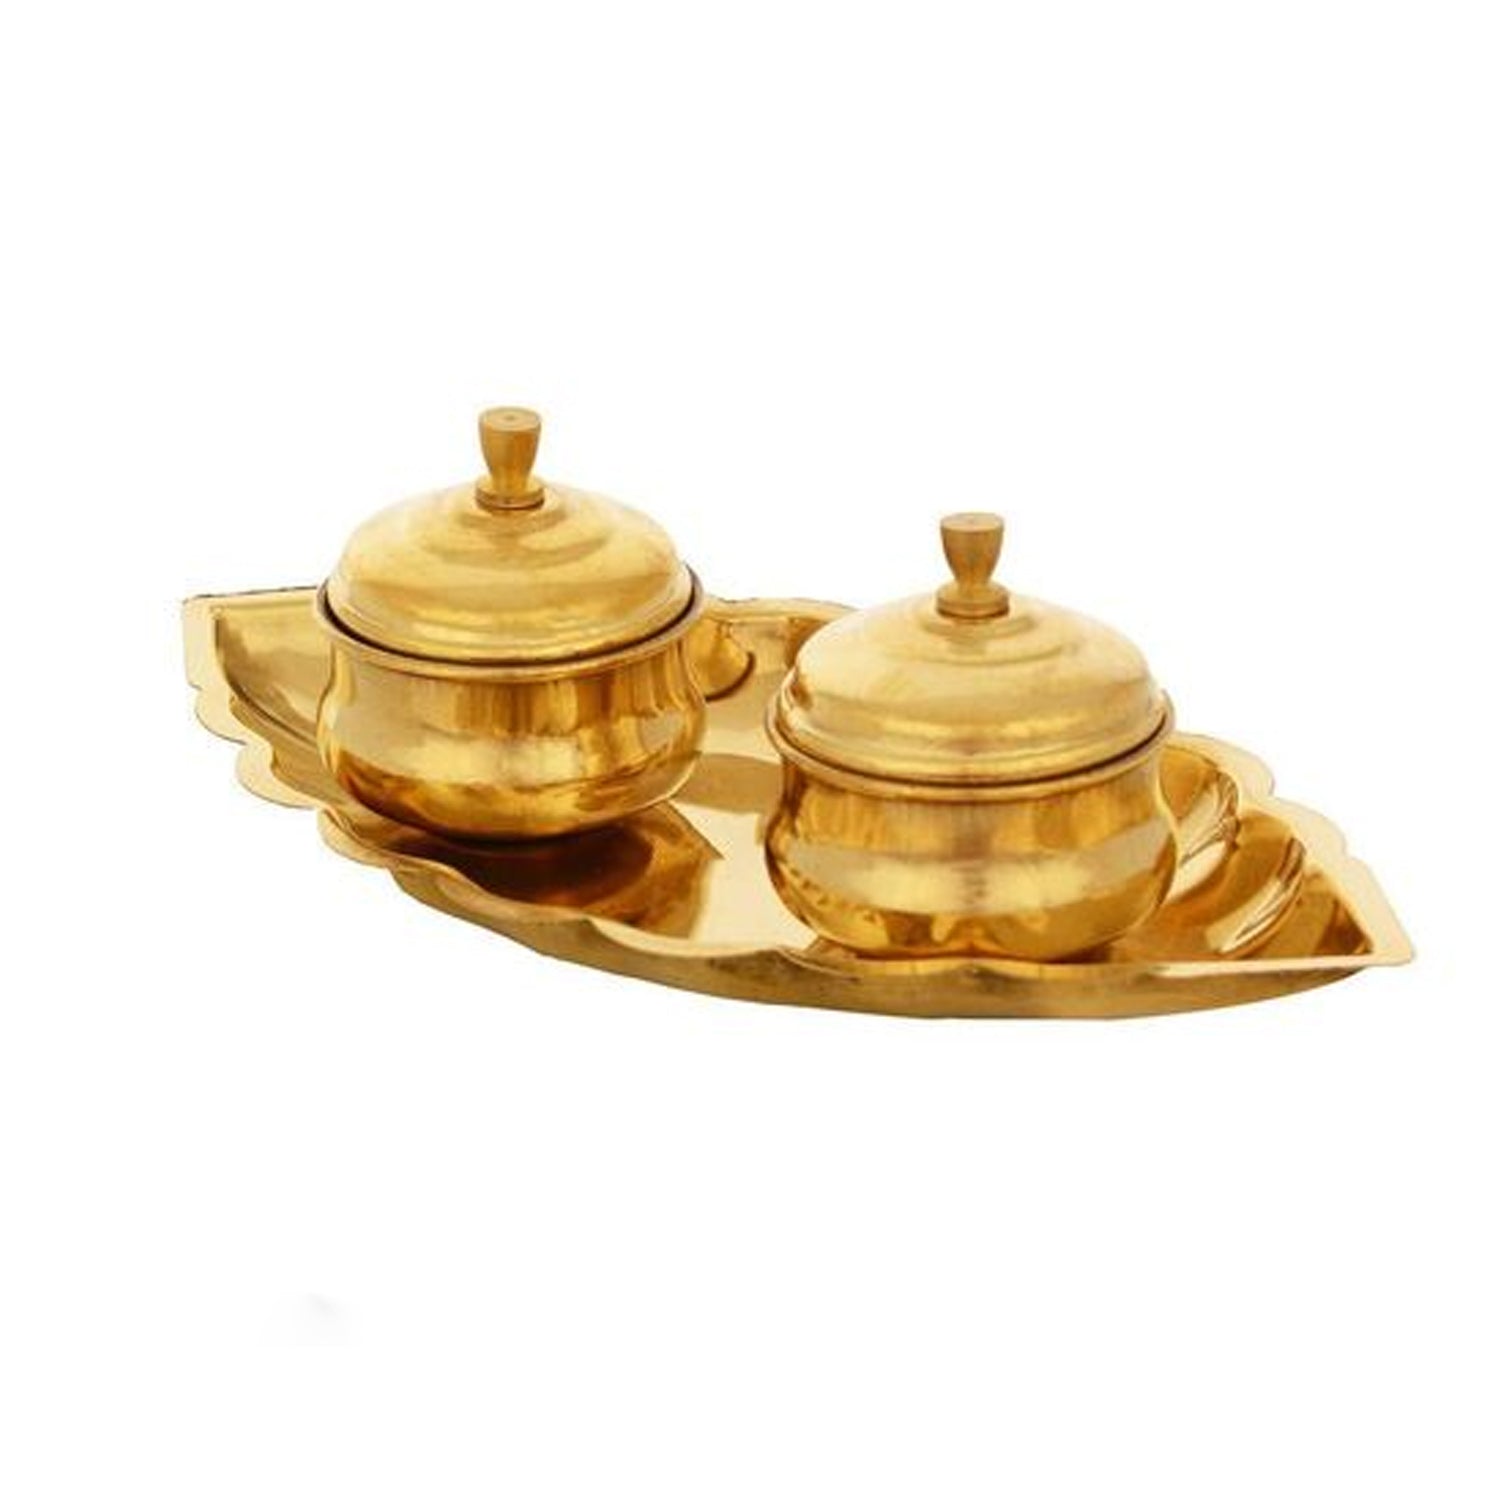 Hastham Patham Our brass metal Set 4 inches